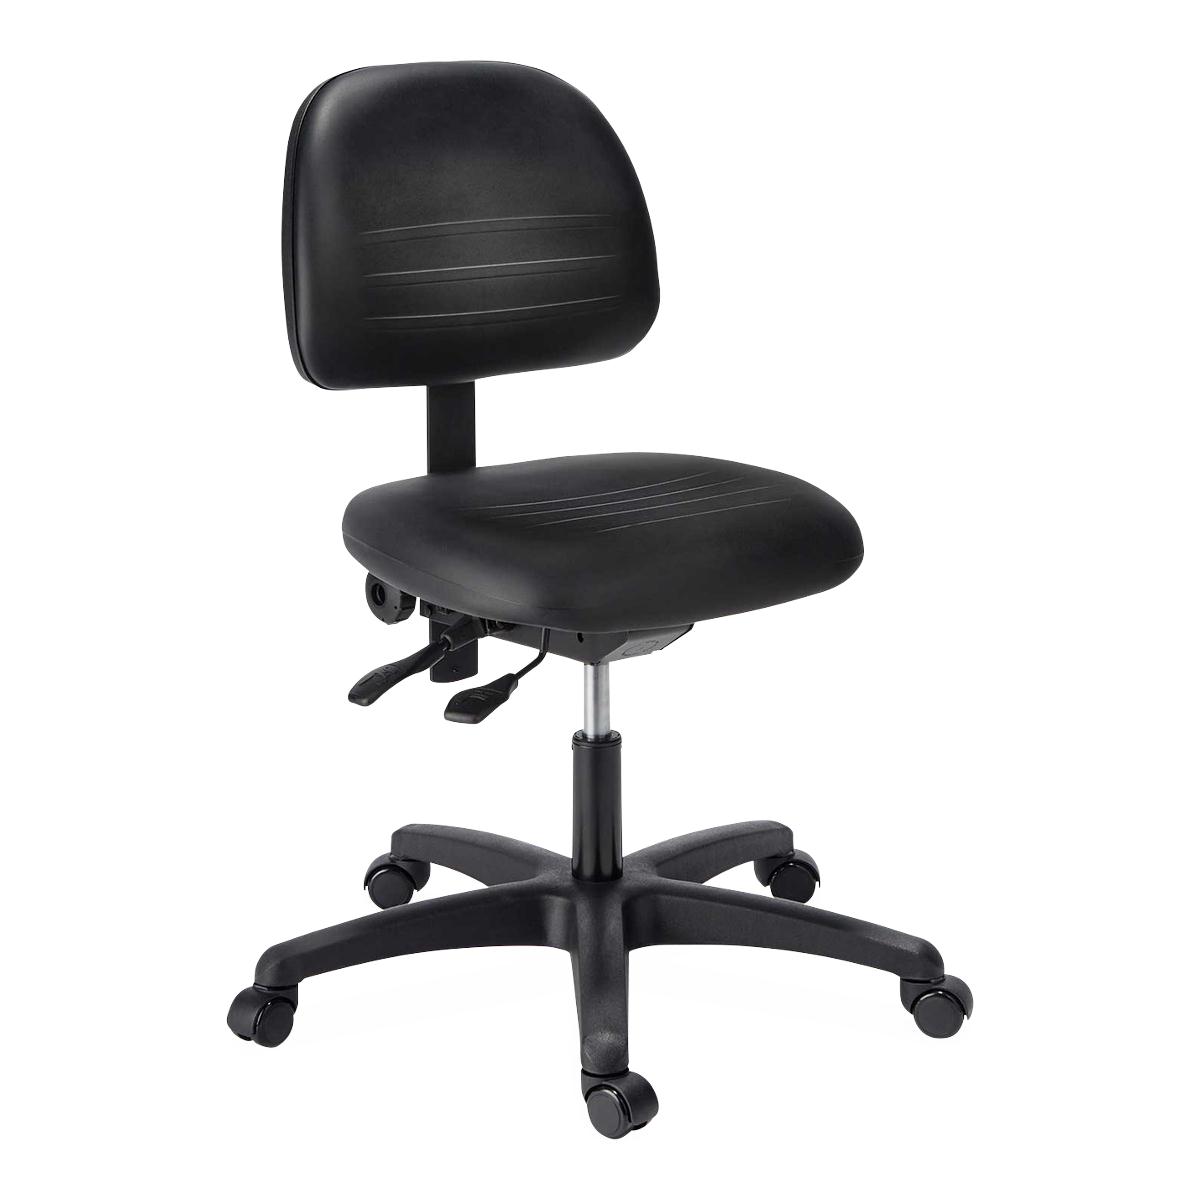 Fusion R+ Desk Height Chair with 4-Way Mechanism | Medline 